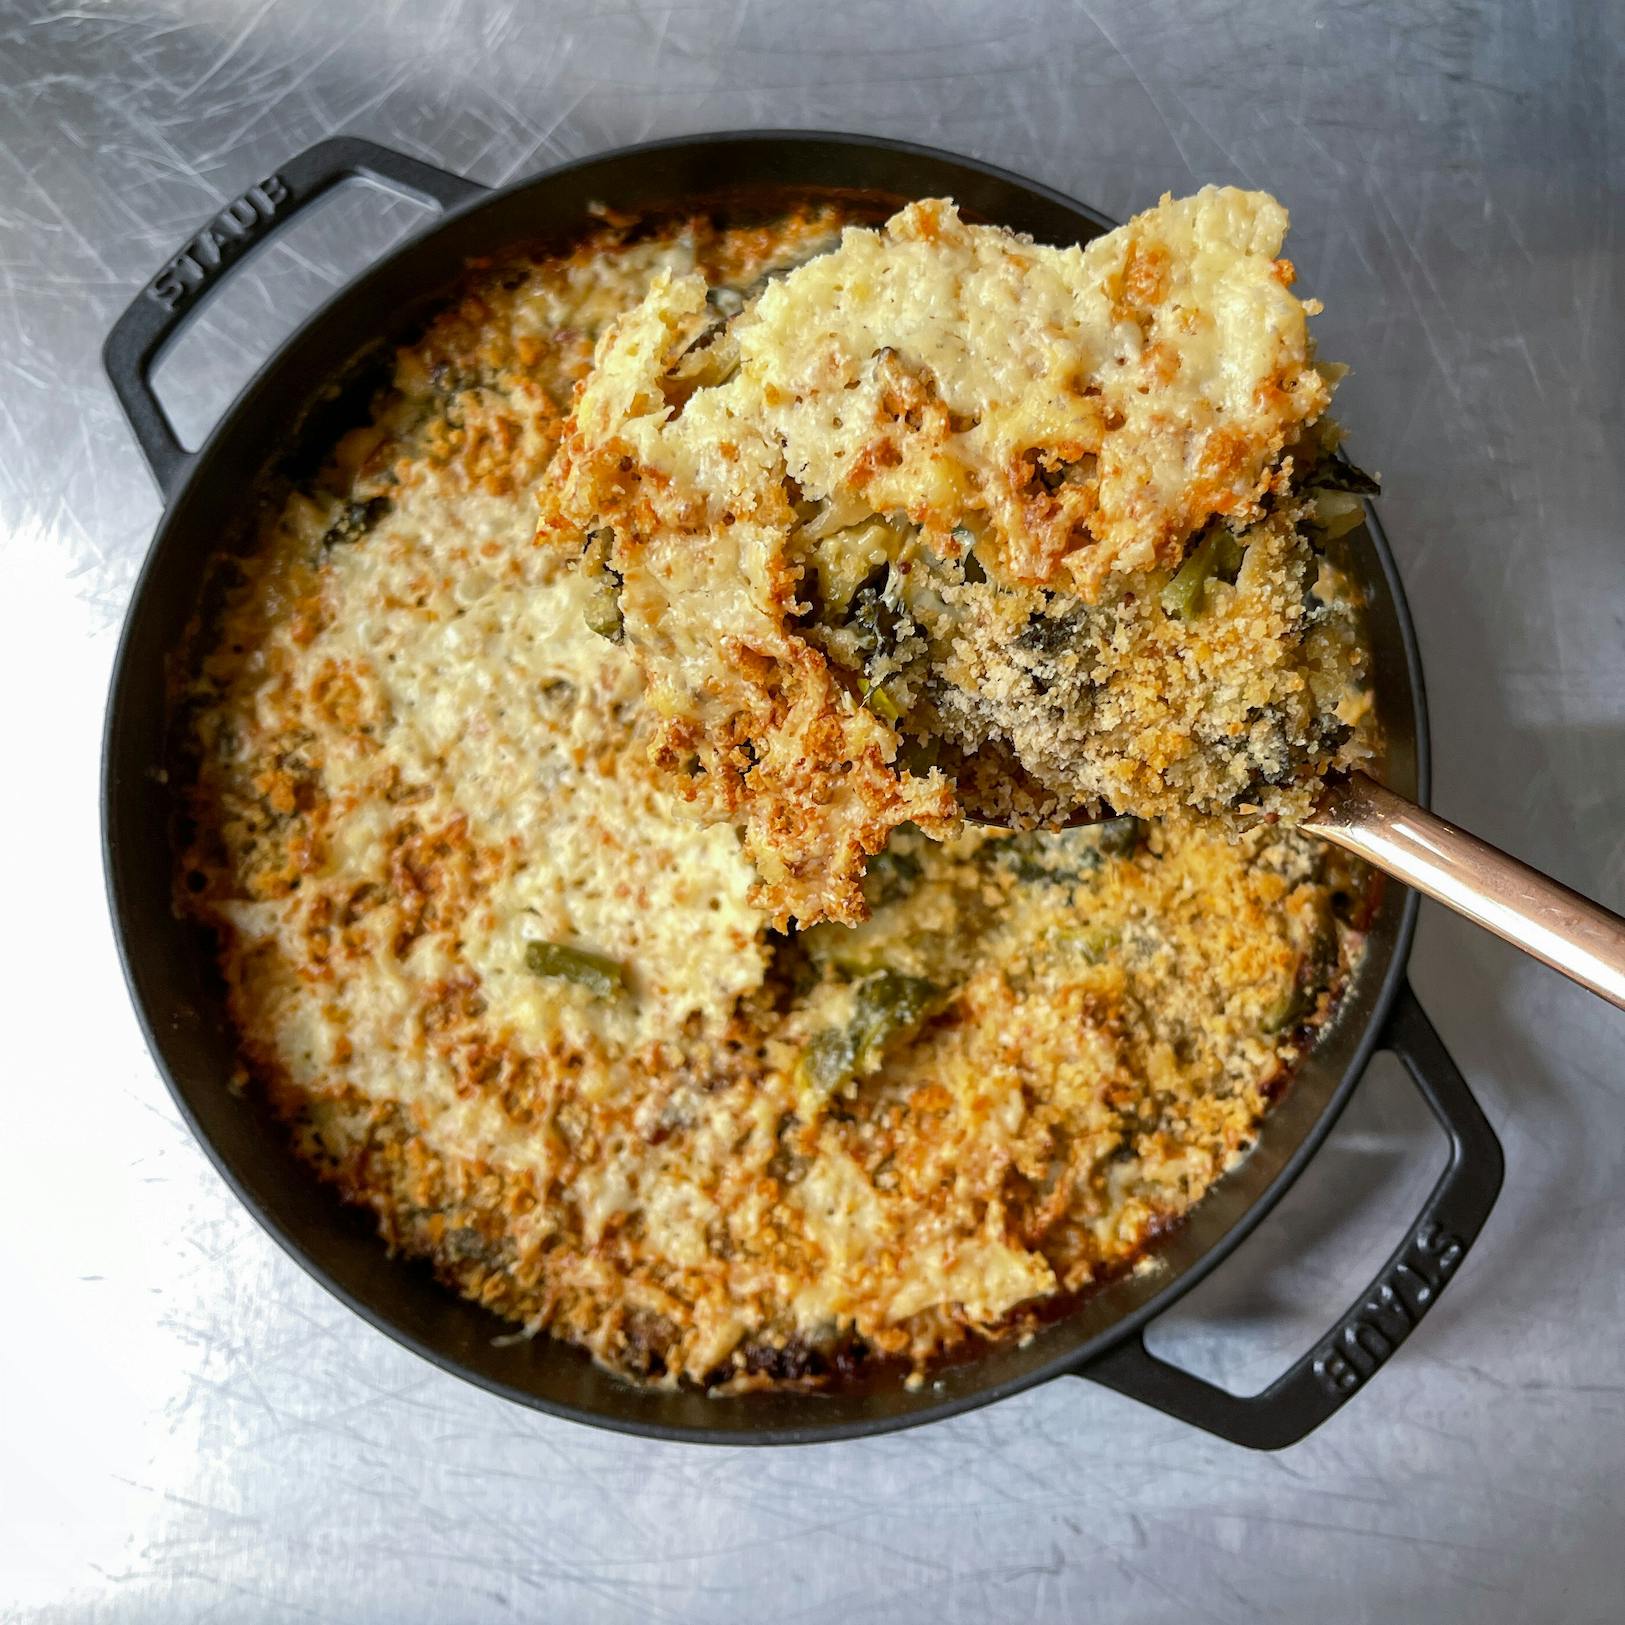 Sprout and Cheddar Gratin